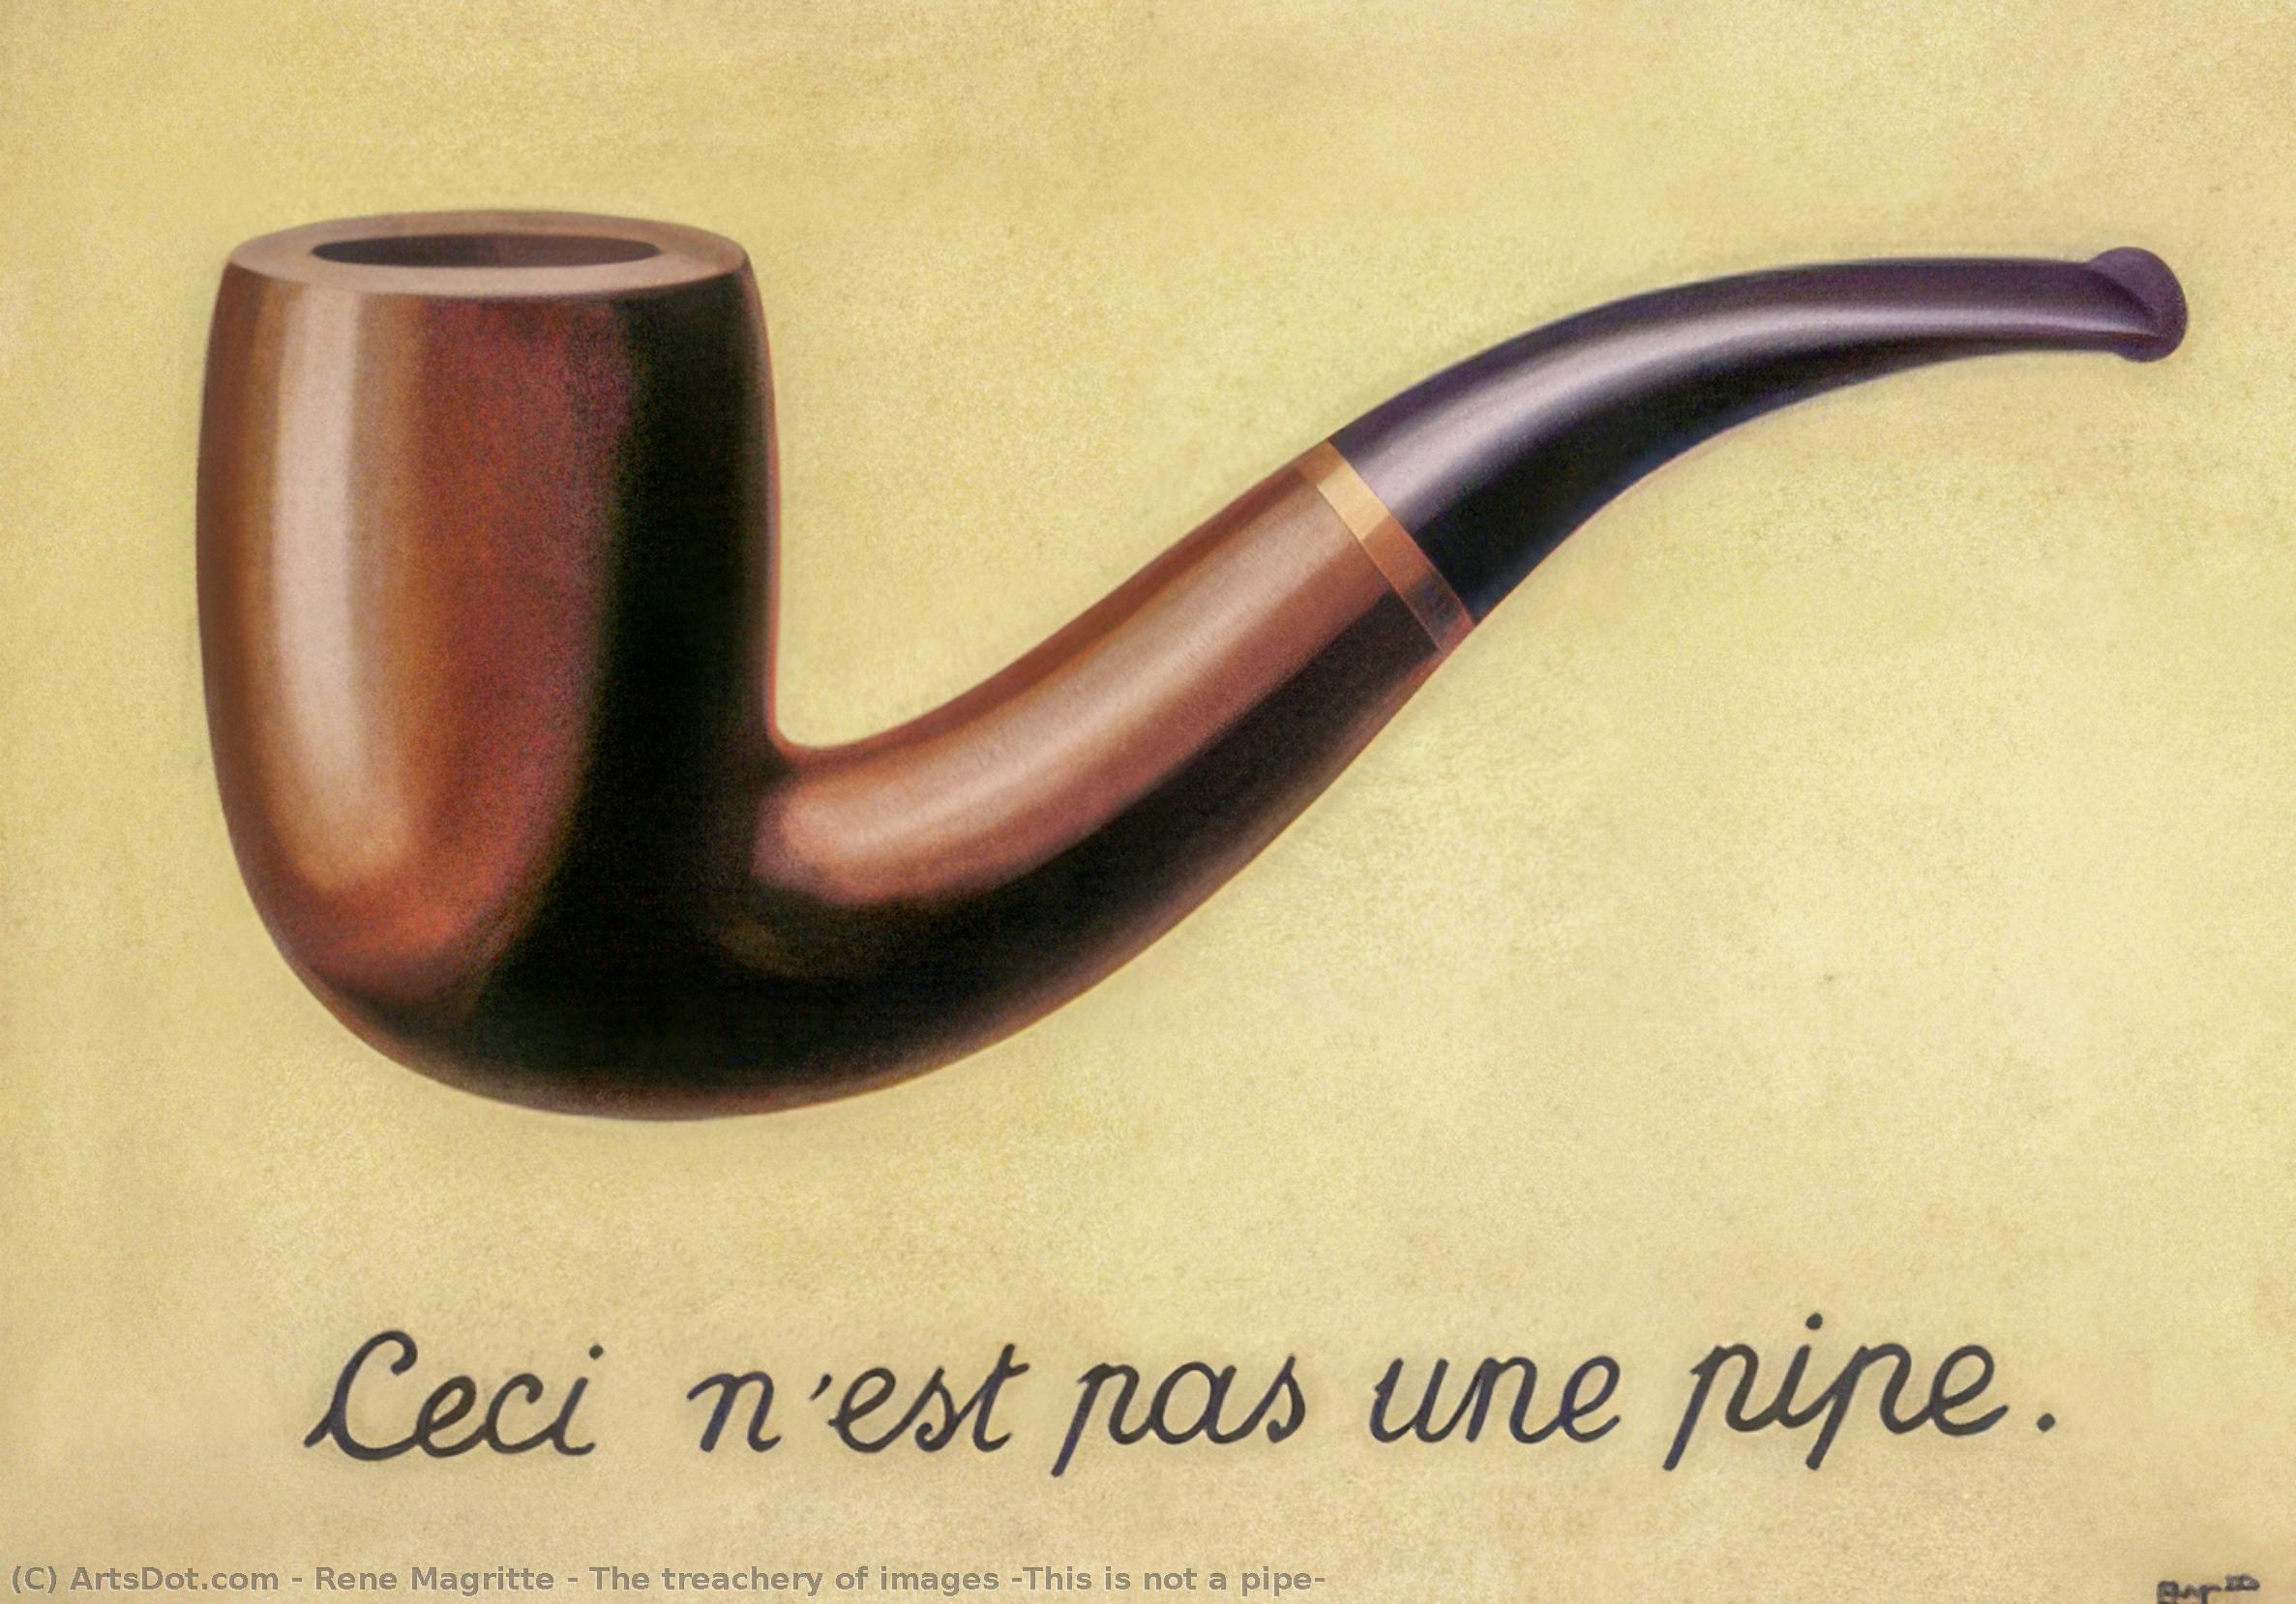  Museum Art Reproductions The treachery of images (This is not a pipe), 1948 by Rene Magritte (Inspired By) (1898-1967, Belgium) | ArtsDot.com